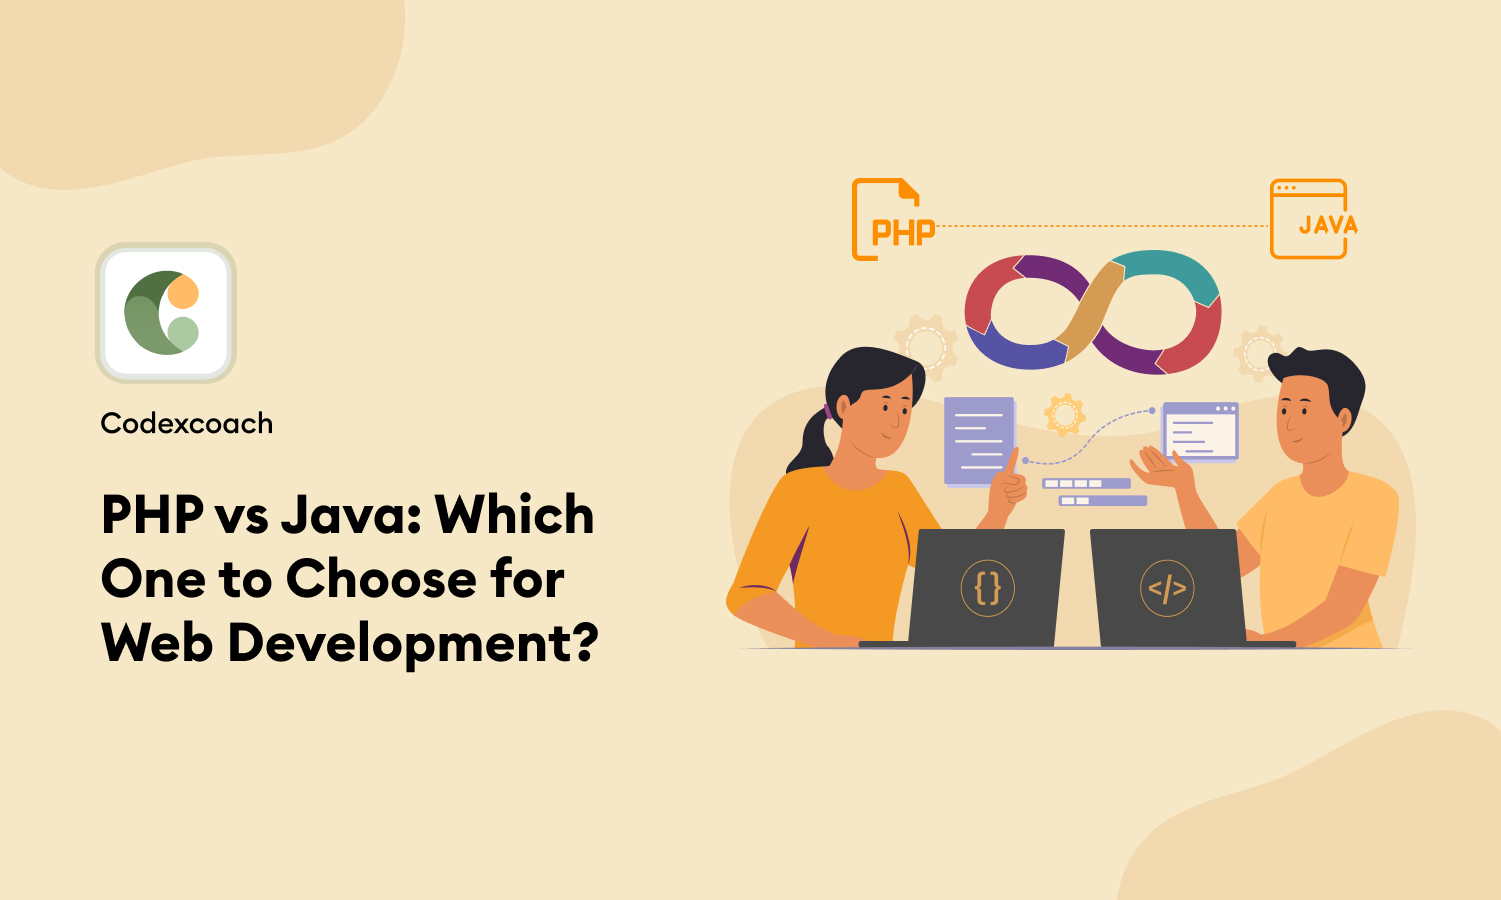 PHP vs Java: Which One to Choose for Web Development?